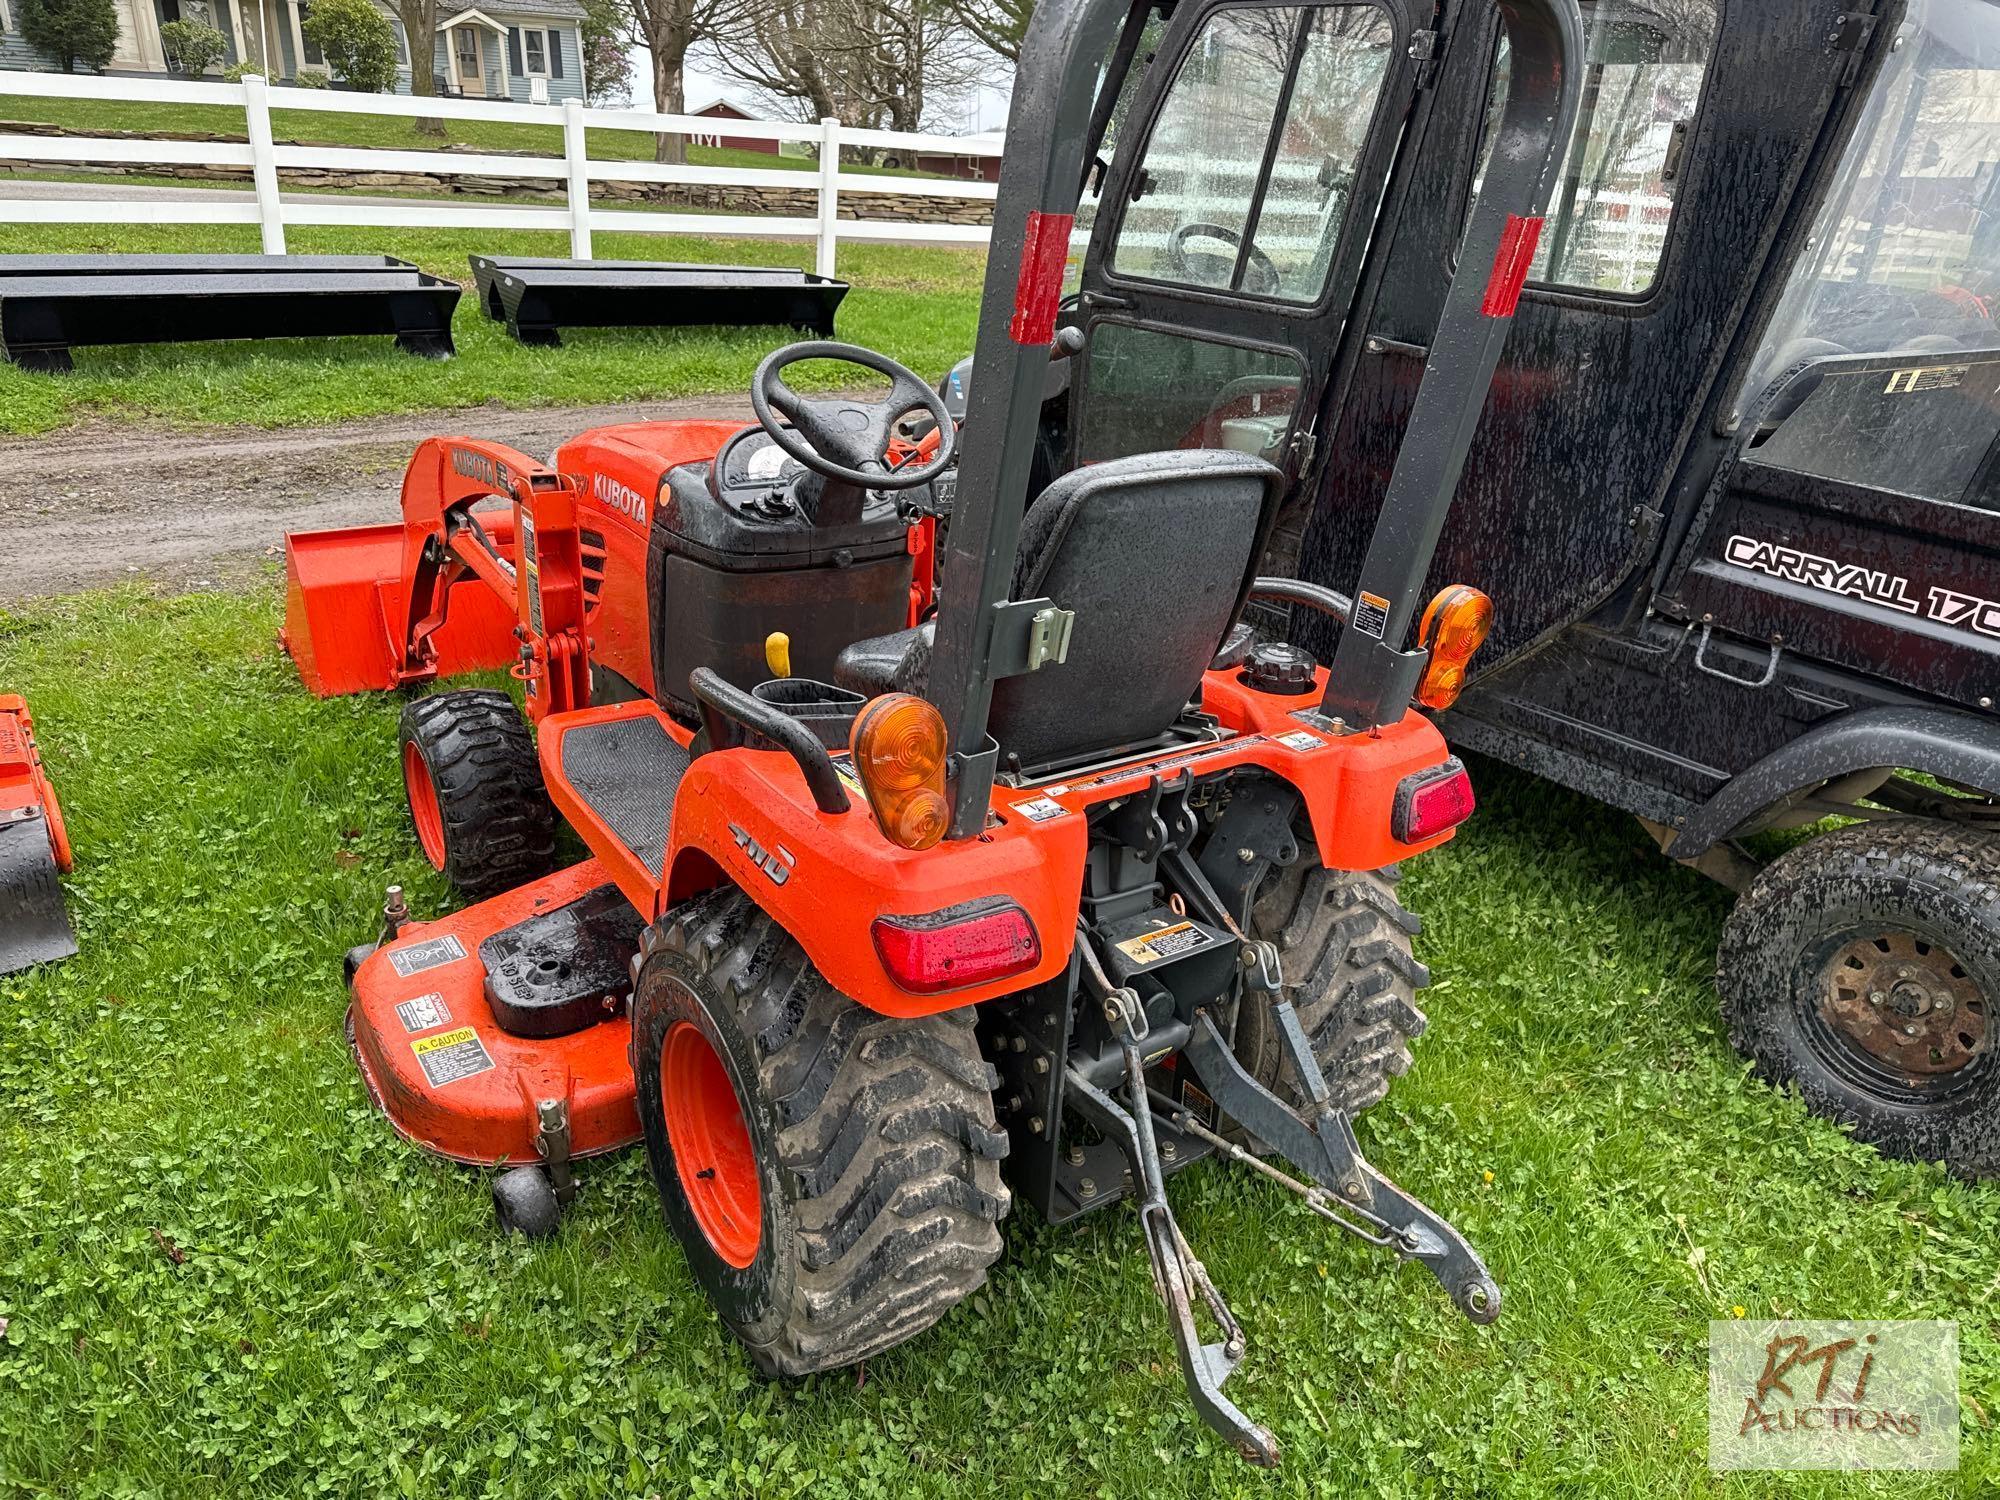 Kubota PX2350 compact tractor, 4WD, quick connect loader, 60in belly mower, HST, 3pt hitch, 1647